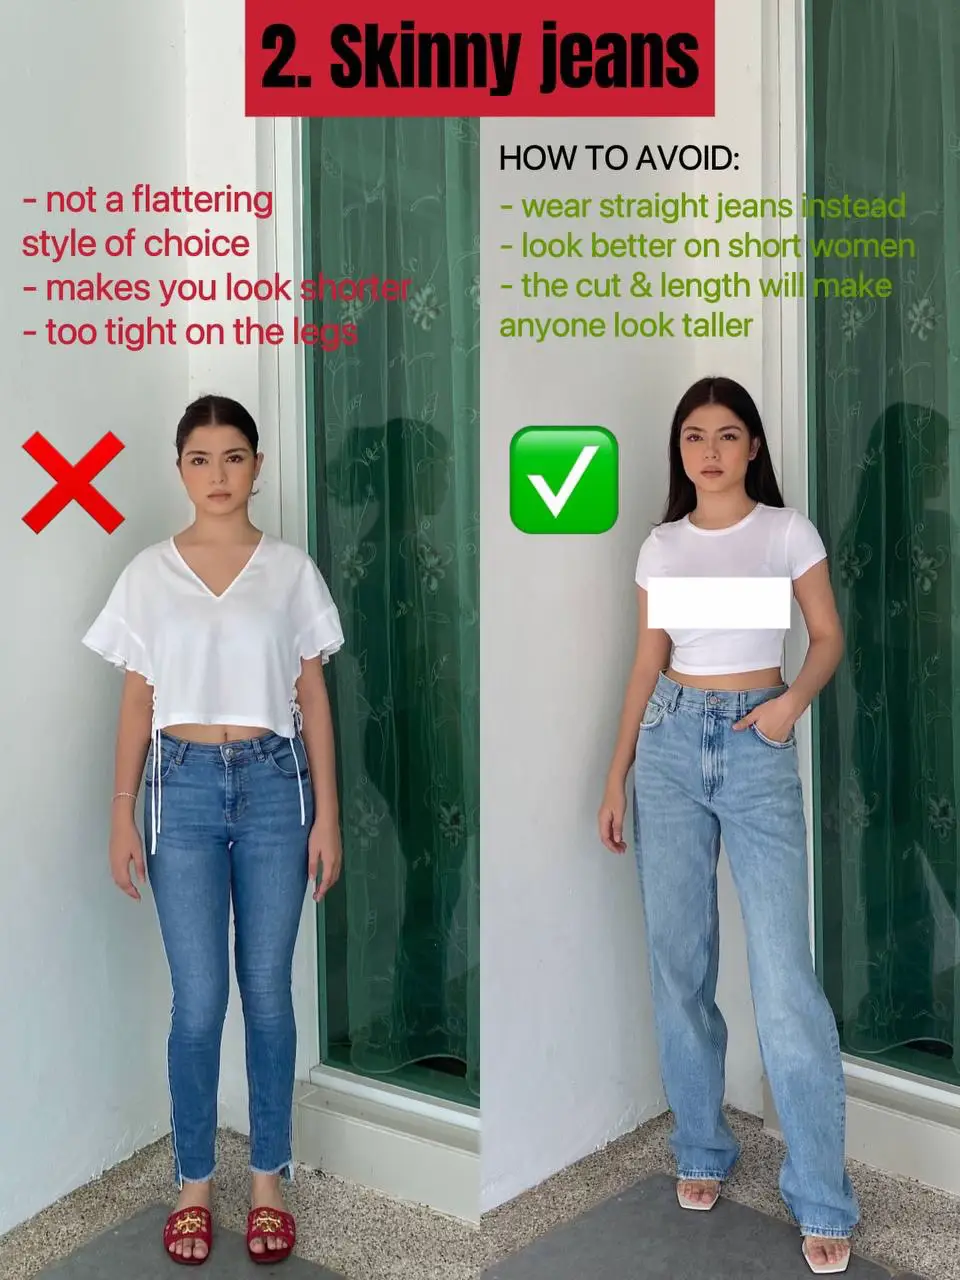 4 fashion mistakes to AVOID!'s images(2)